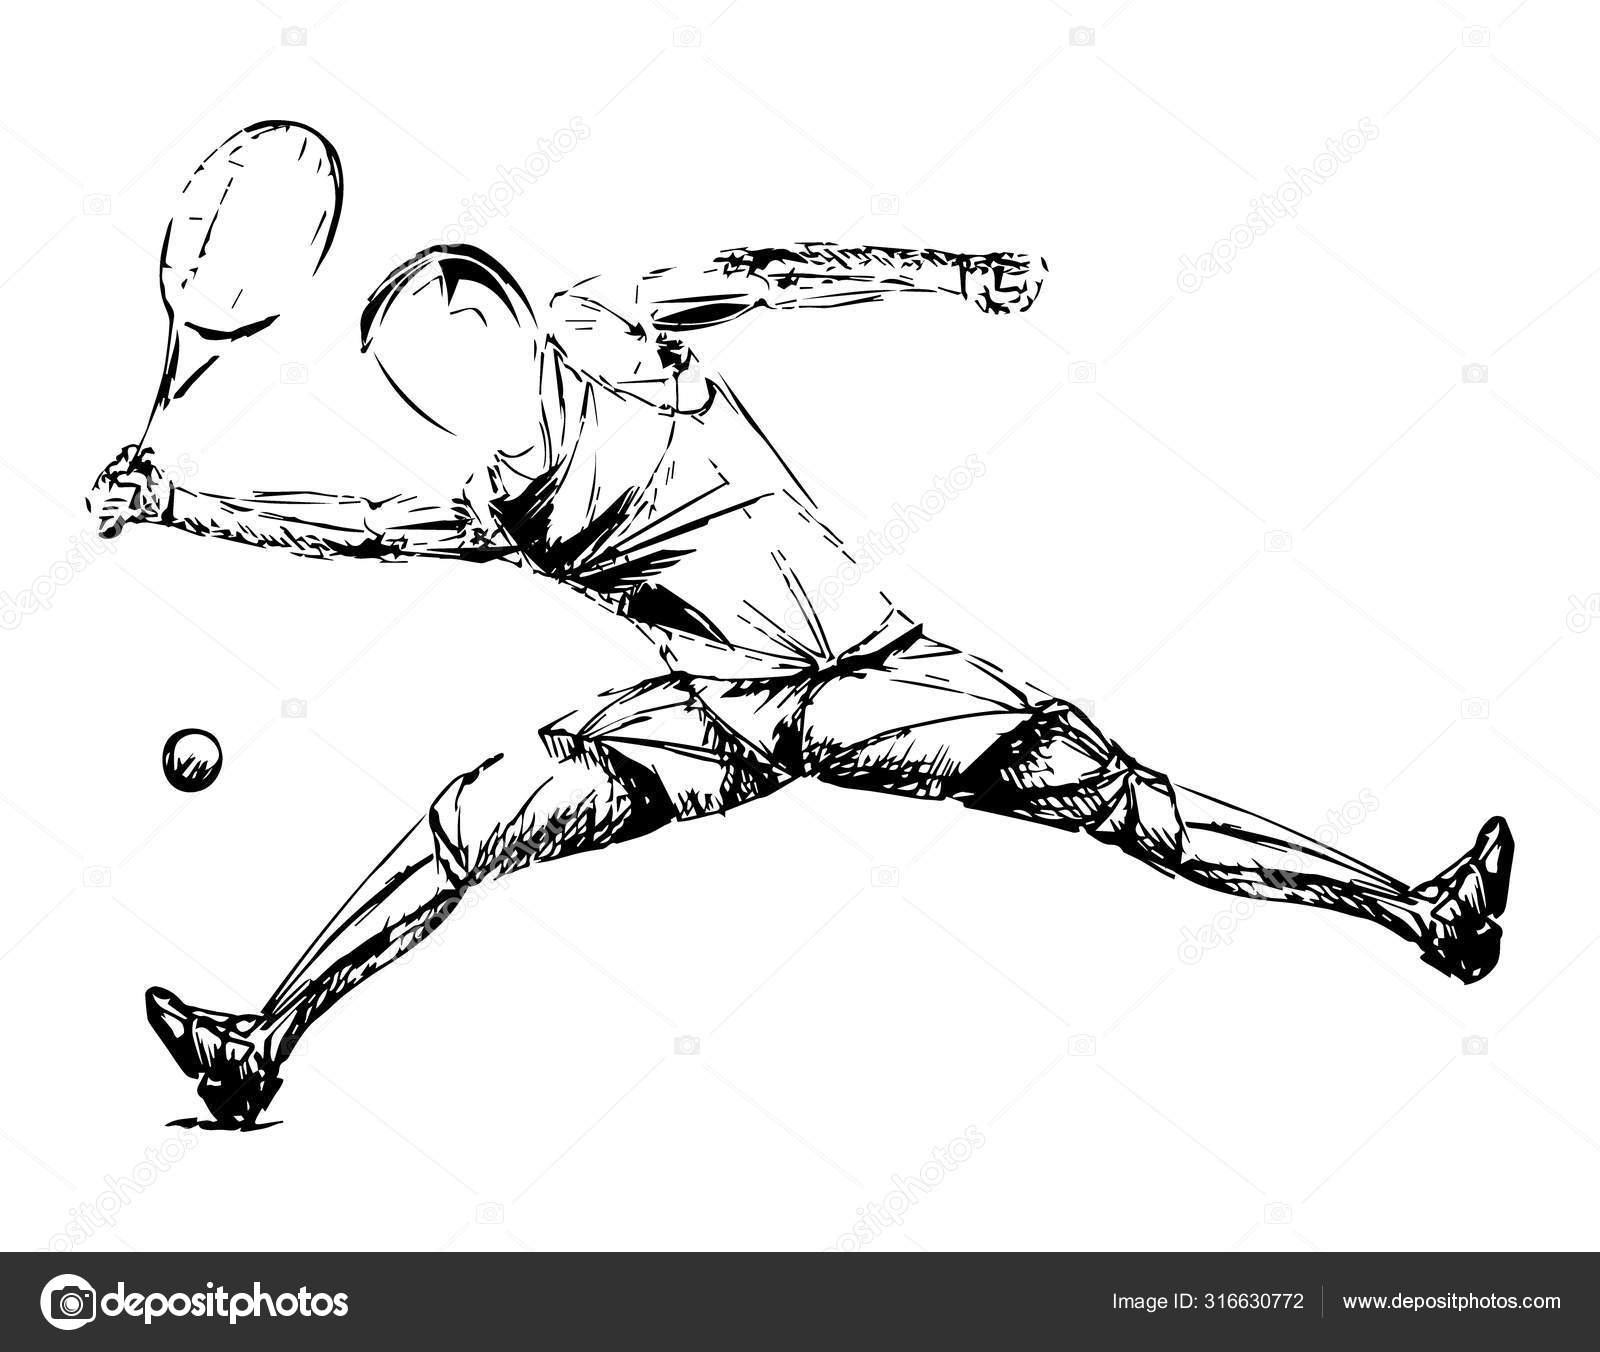 Animal Rough Sketch Drawing Tennis Athlete with simple drawing